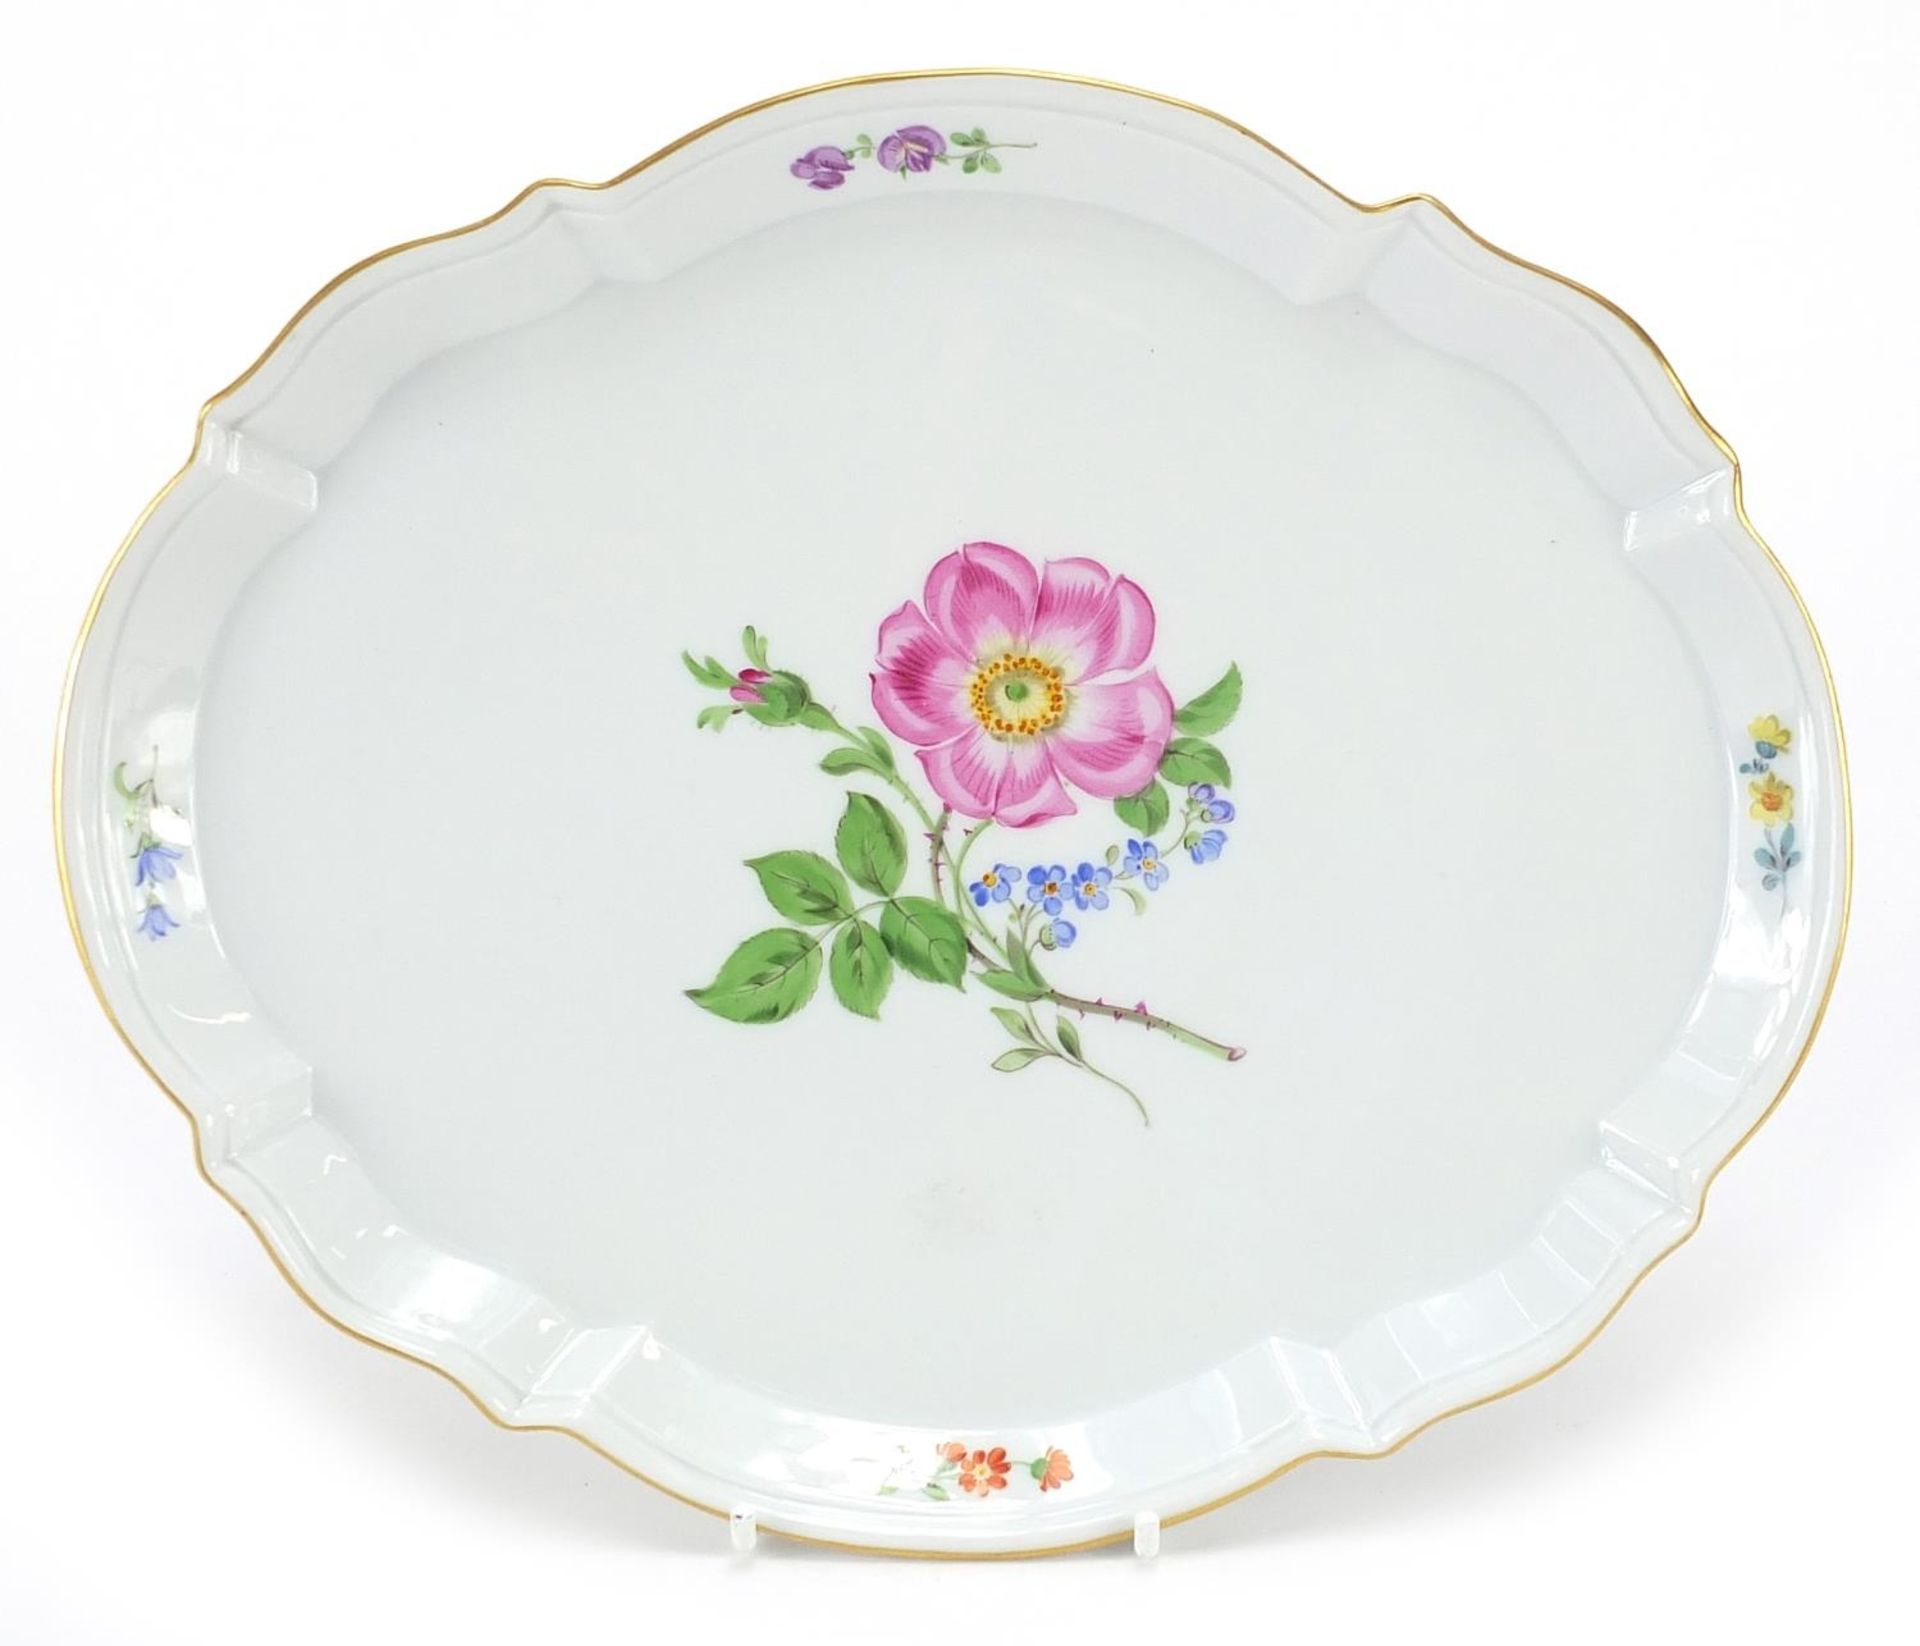 Meissen, German porcelain tray hand painted with flowers, 27cm wide